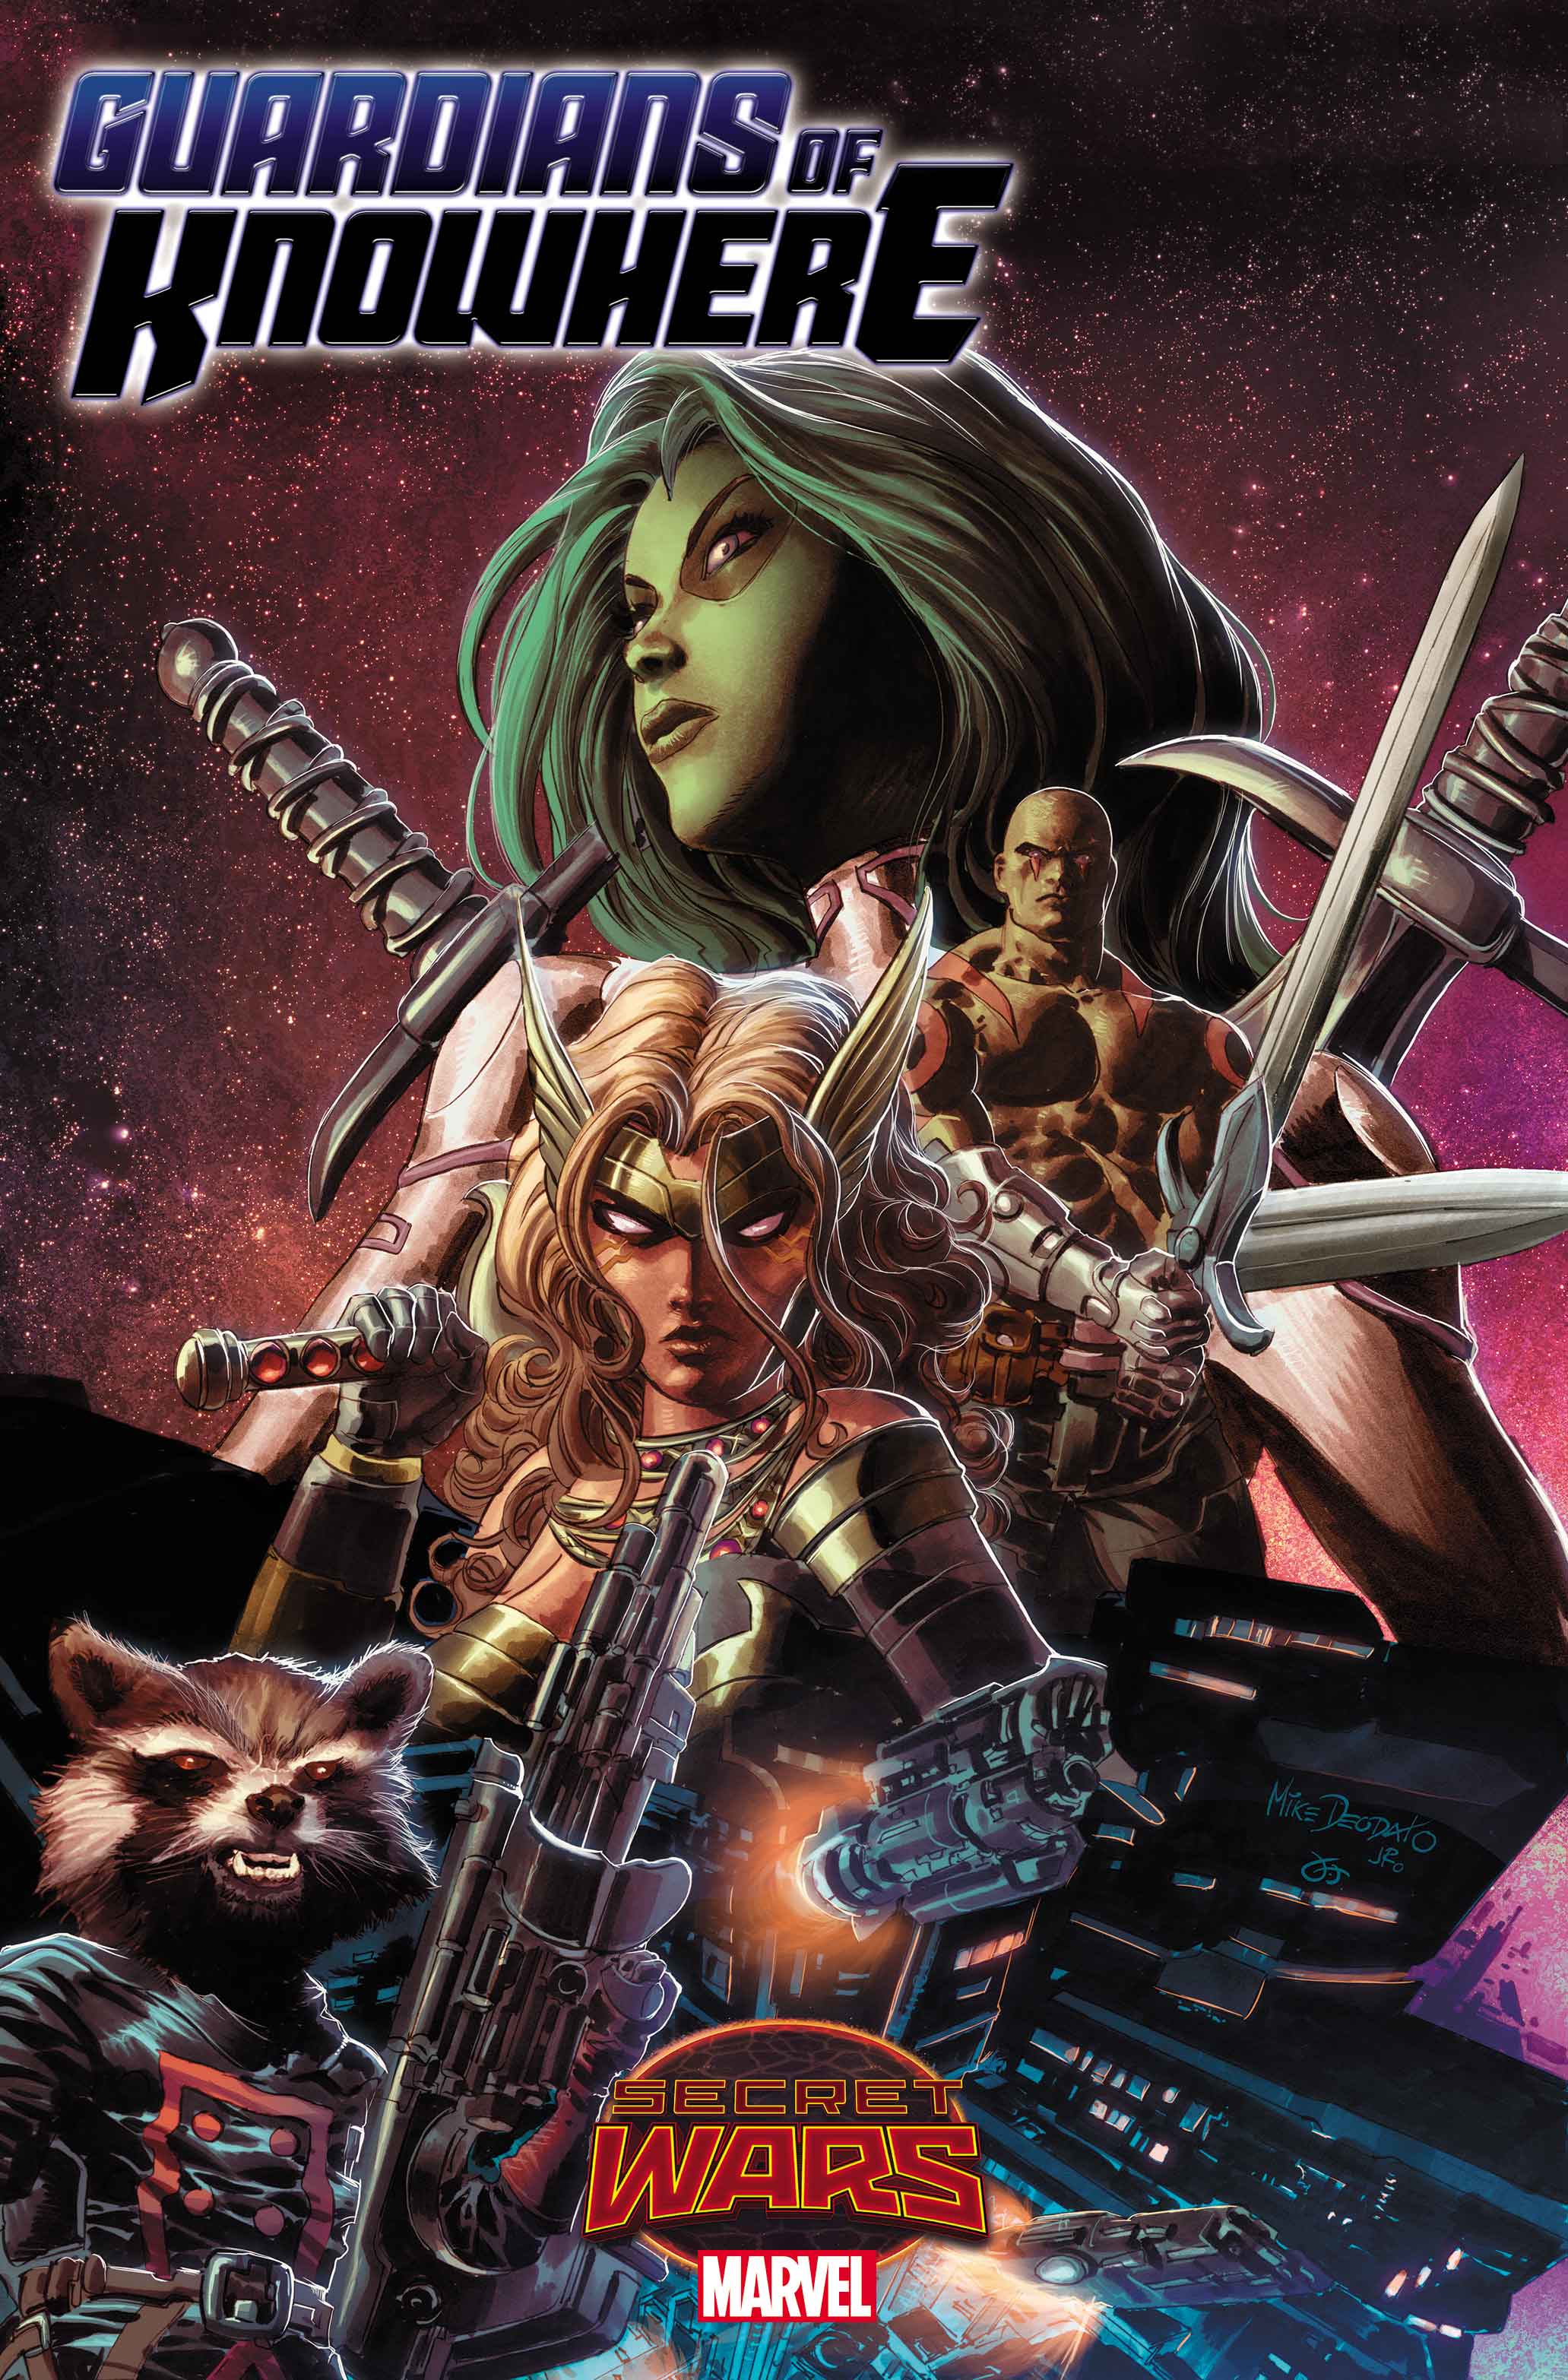 Guardians_of_Knowhere_1_Cover